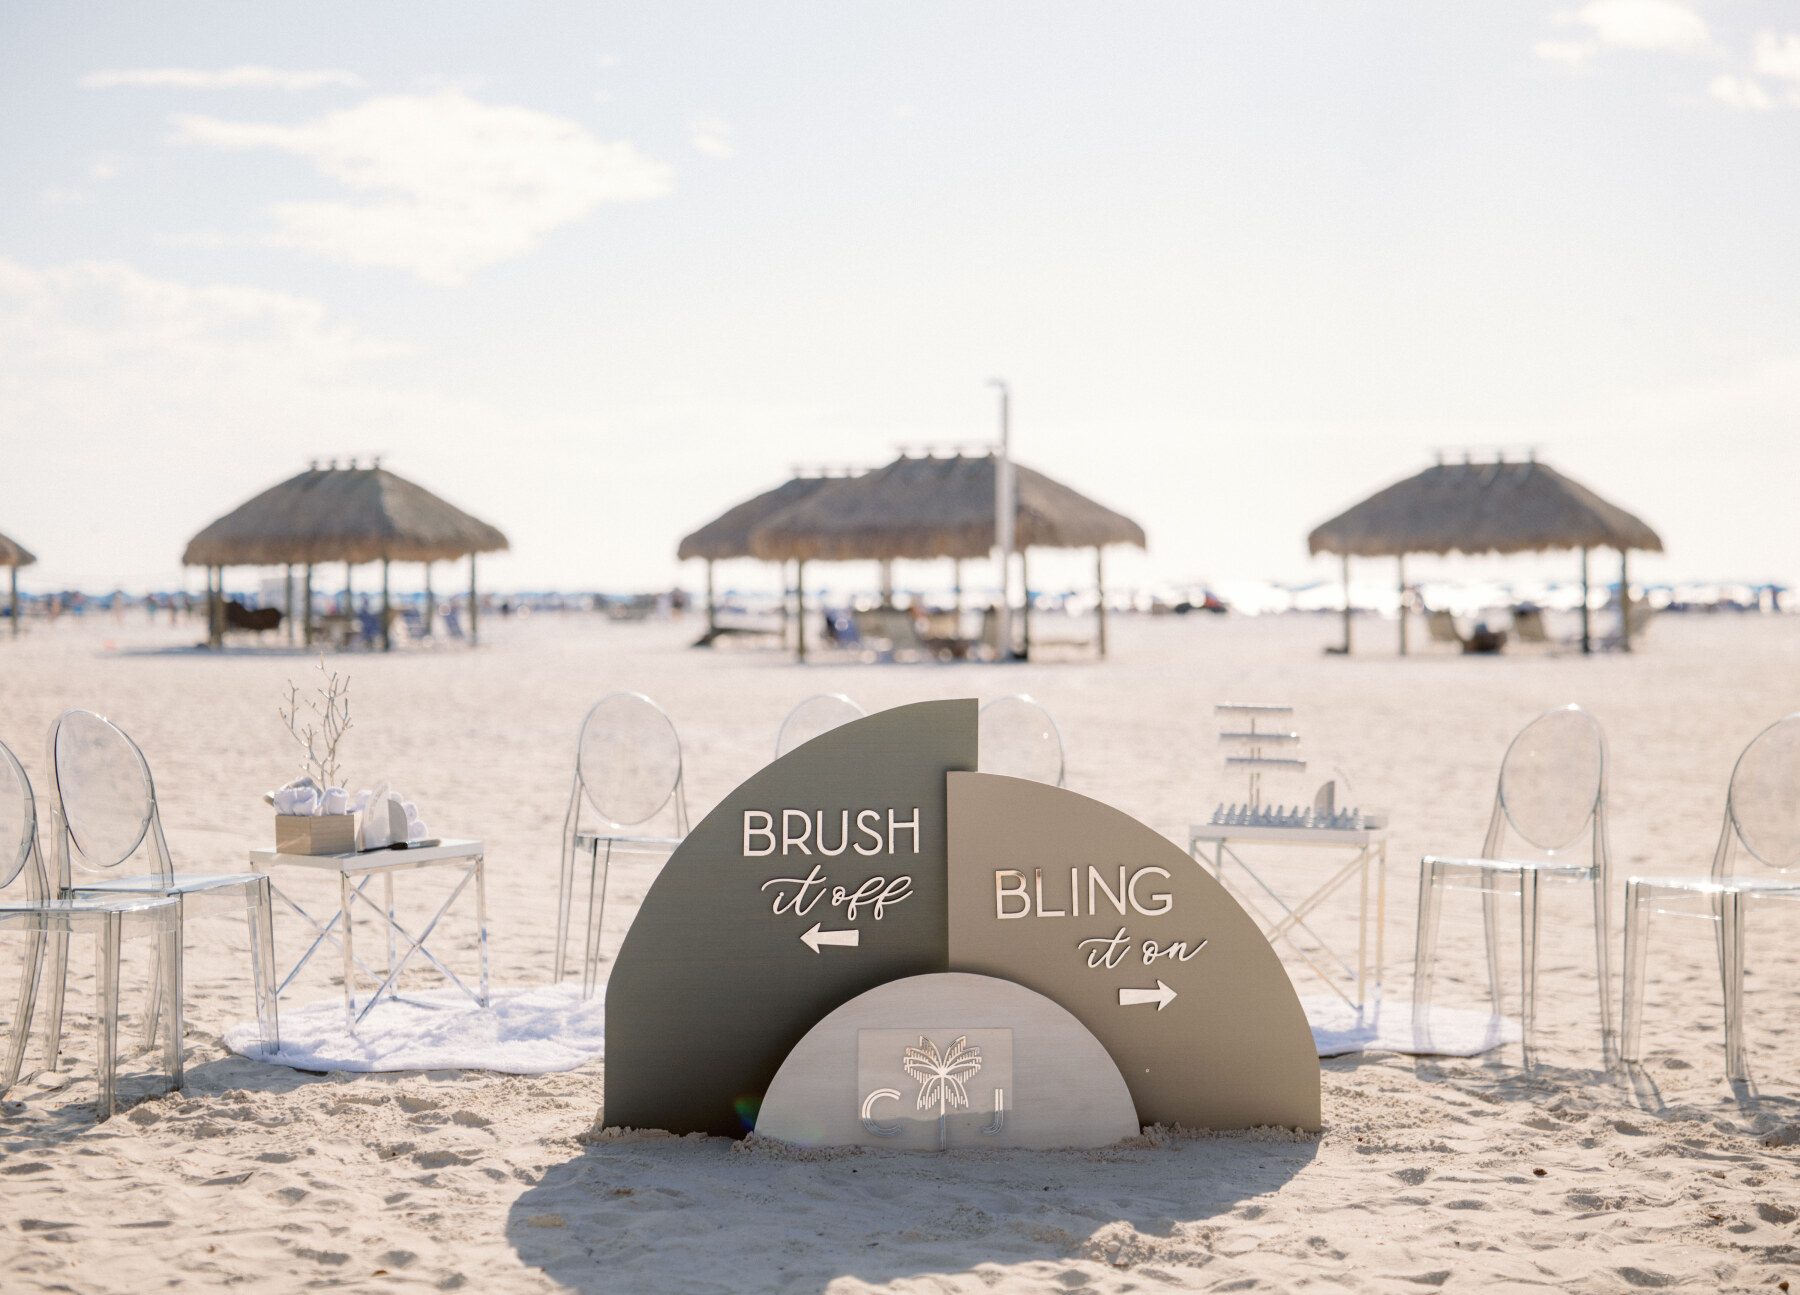 luxe beach wedding set up with signage reading Brush it Off and Bling it On directing guests to stations for decorating their feet for a barefoot wedding